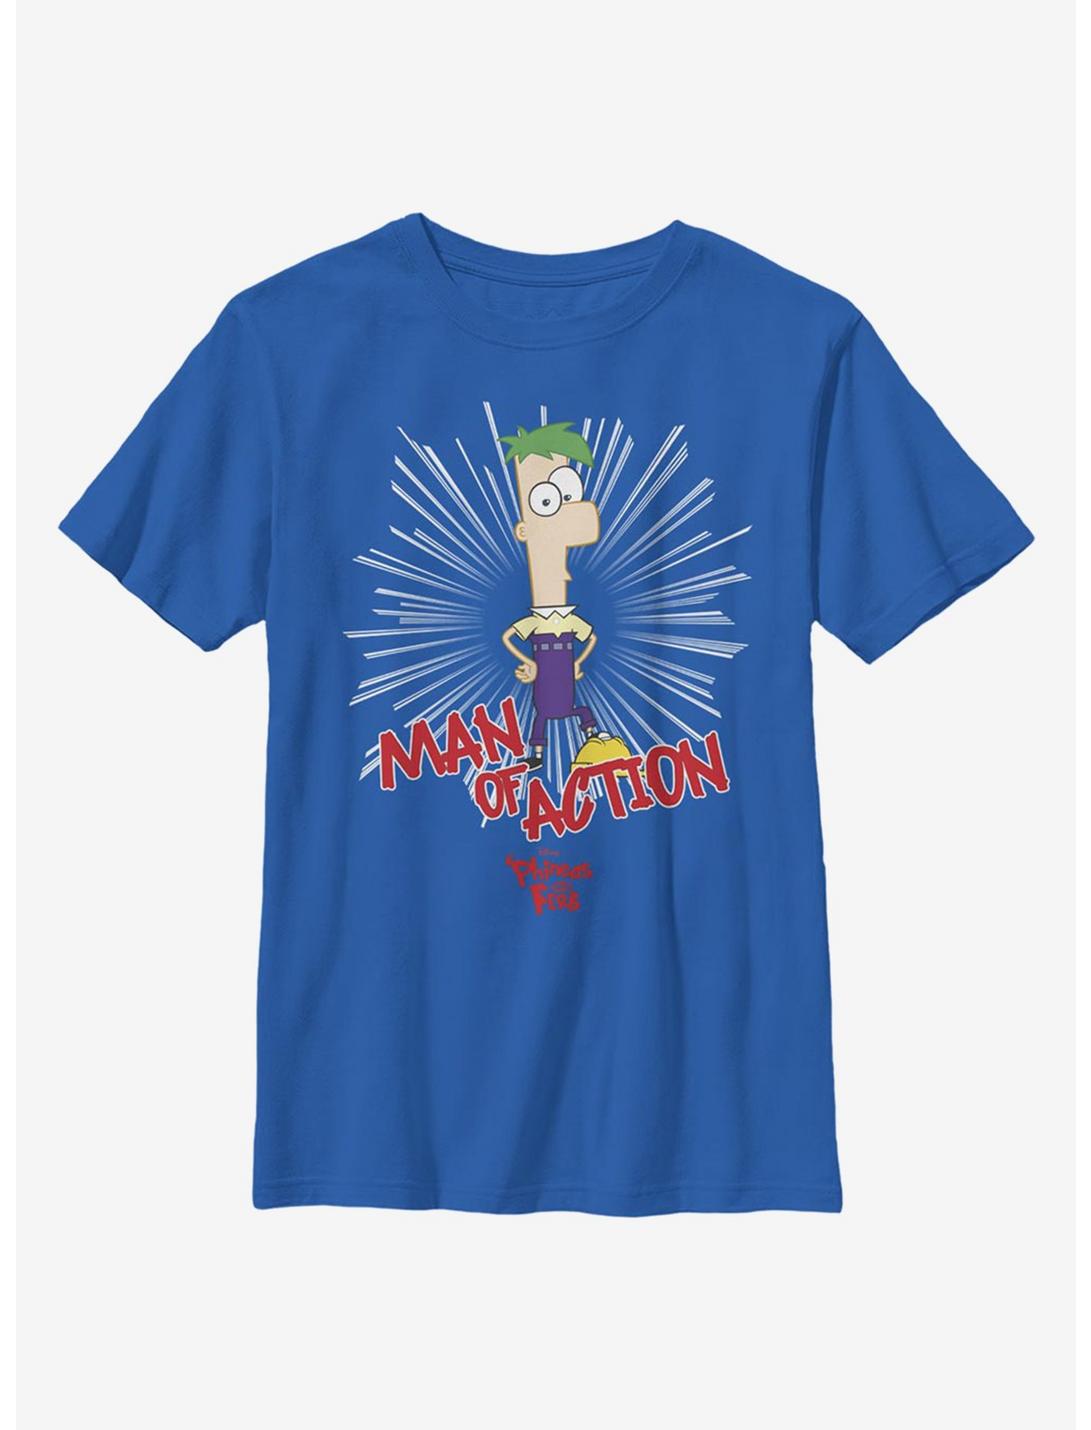 Disney Phineas And Ferb Man Of Action Youth T-Shirt, ROYAL, hi-res